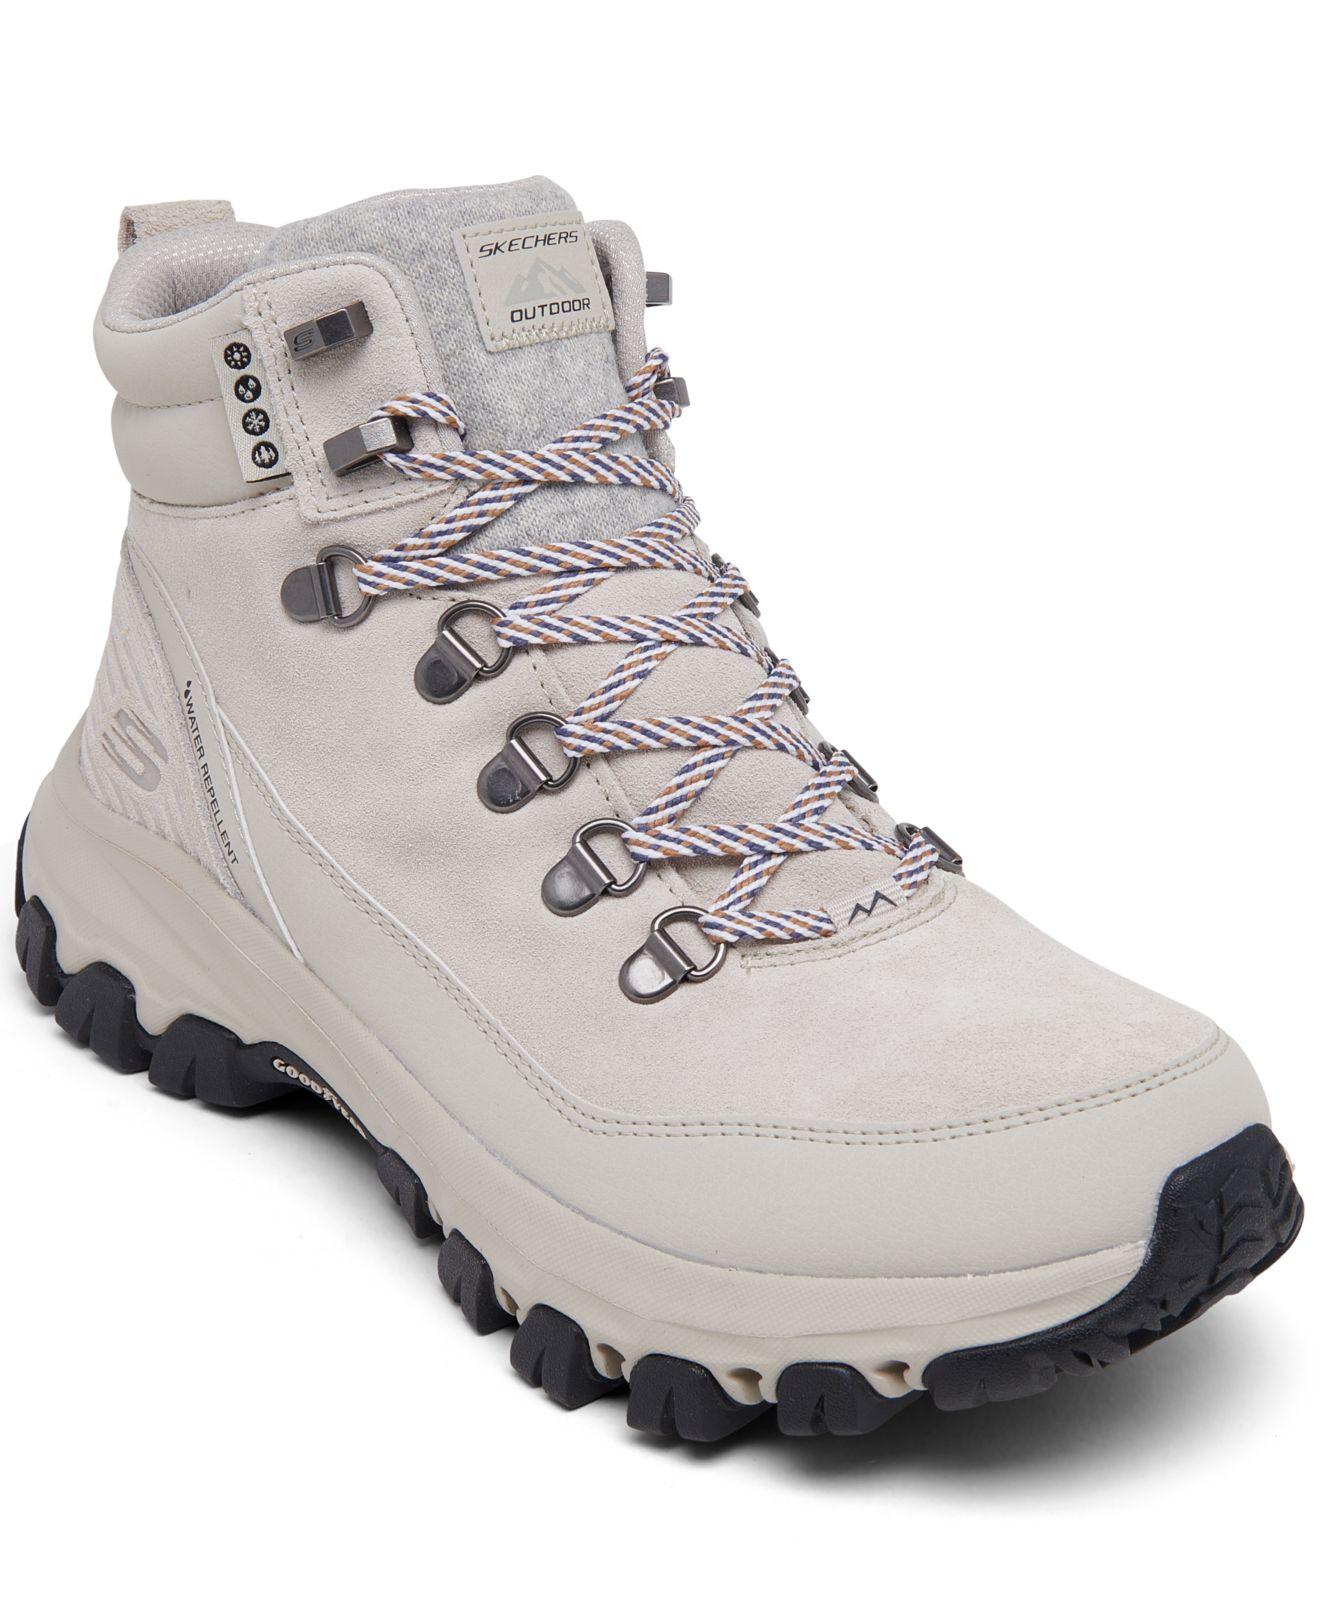 Skechers Relaxed Fit - Edgemont - High Profile Hiking Sneaker Boots Finish Line in | Lyst